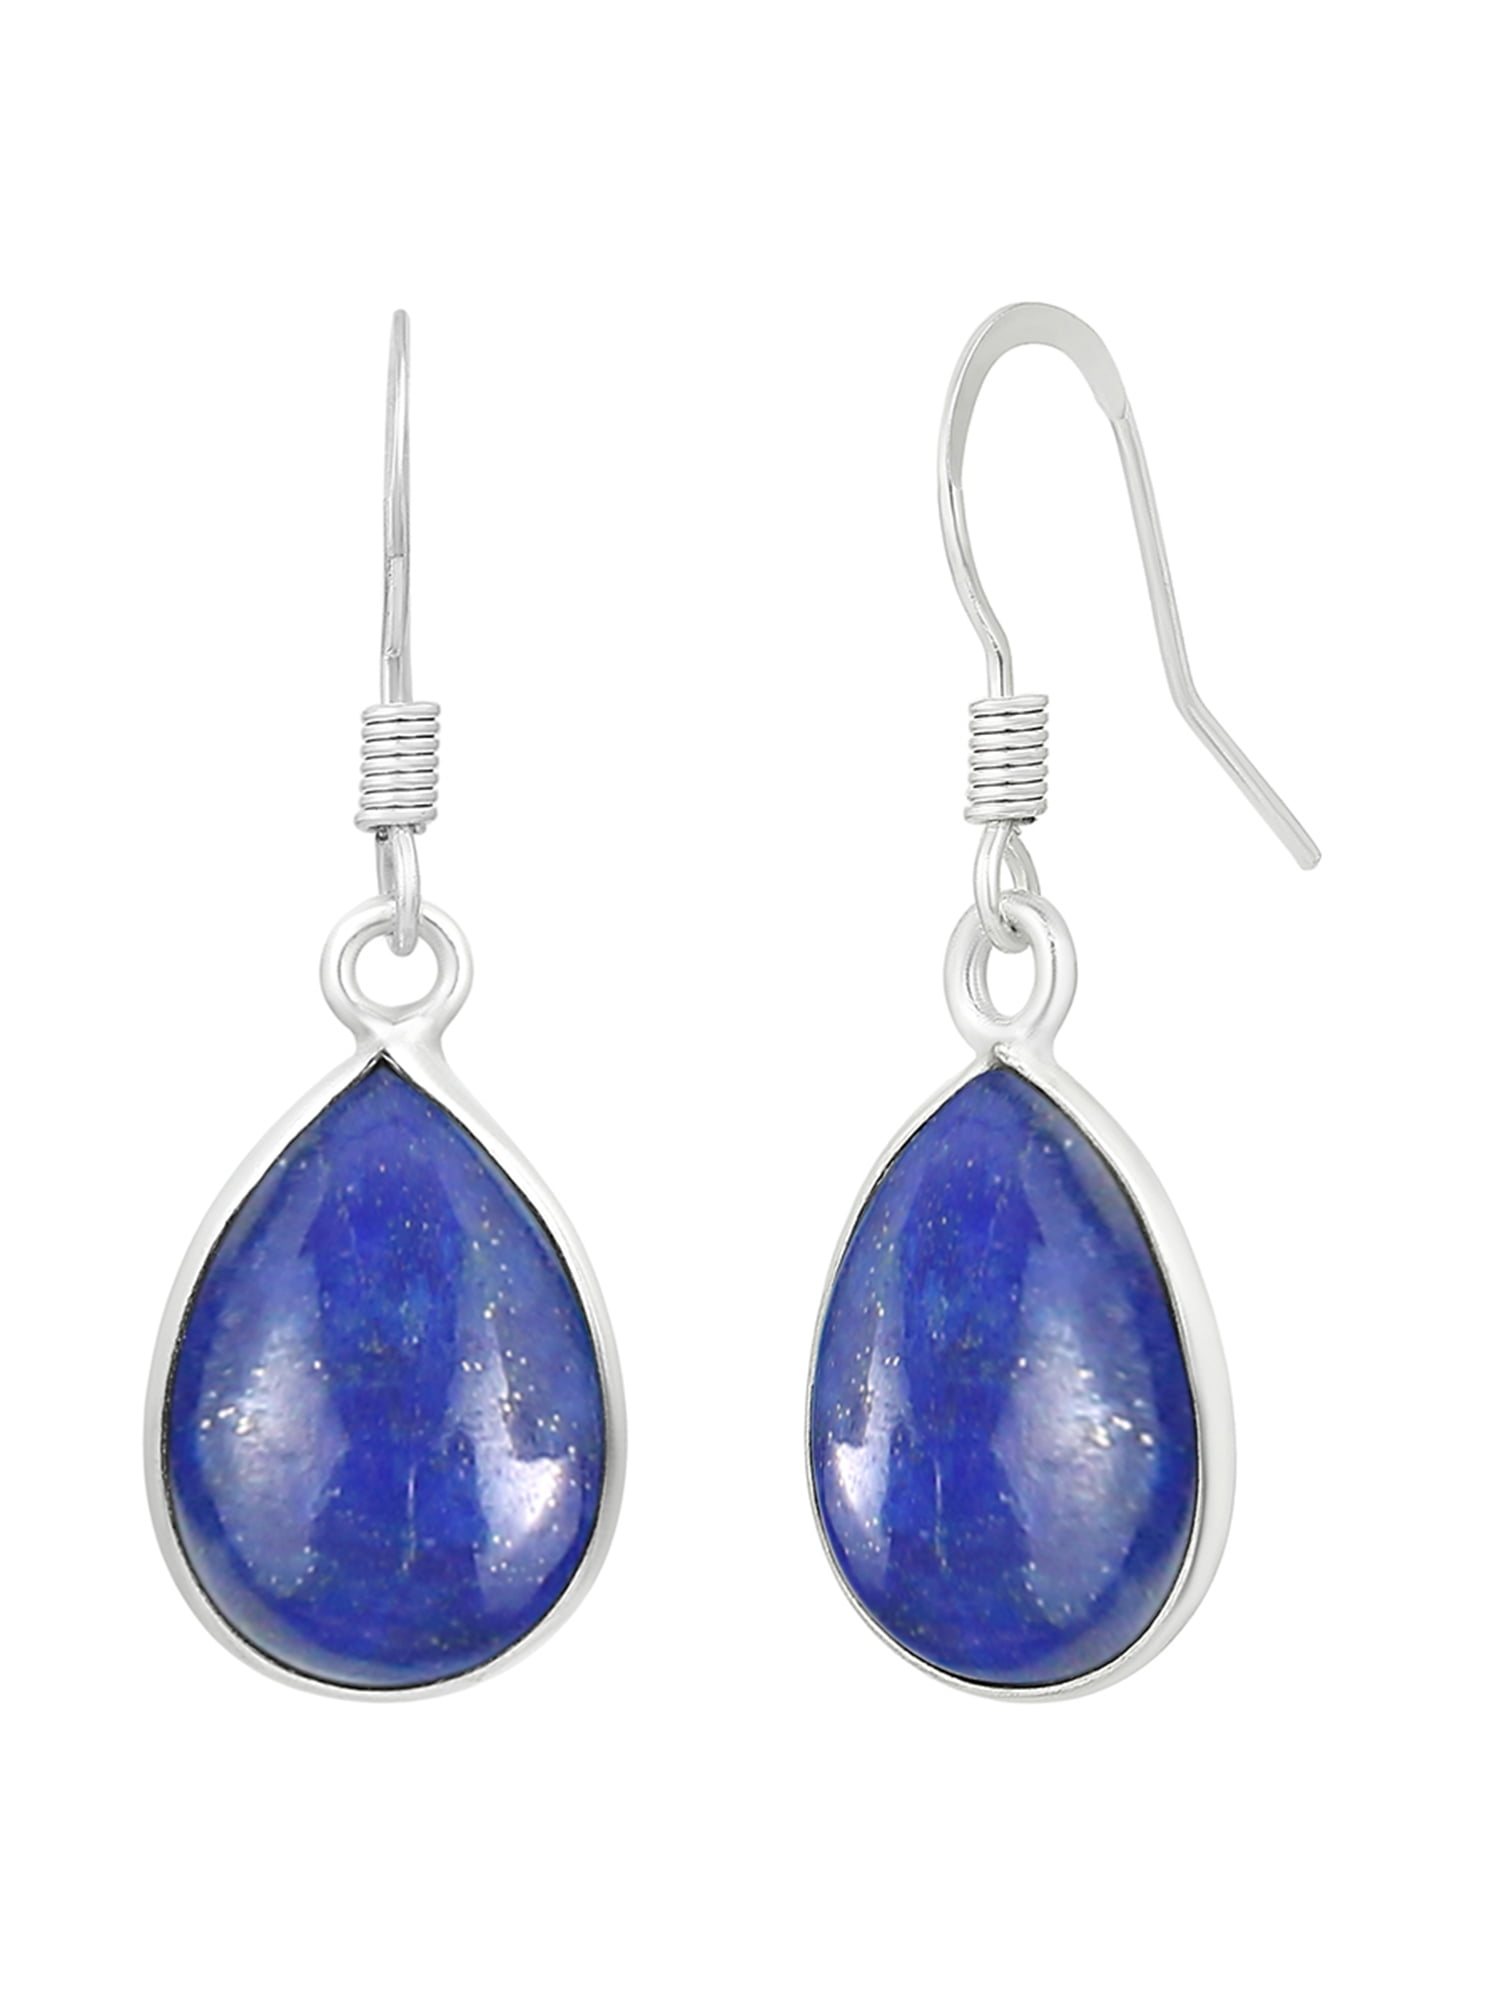 Sterling Silver Natural Blue Lapis Lazuli Dangle Stud Earrings  *VARIETY* 